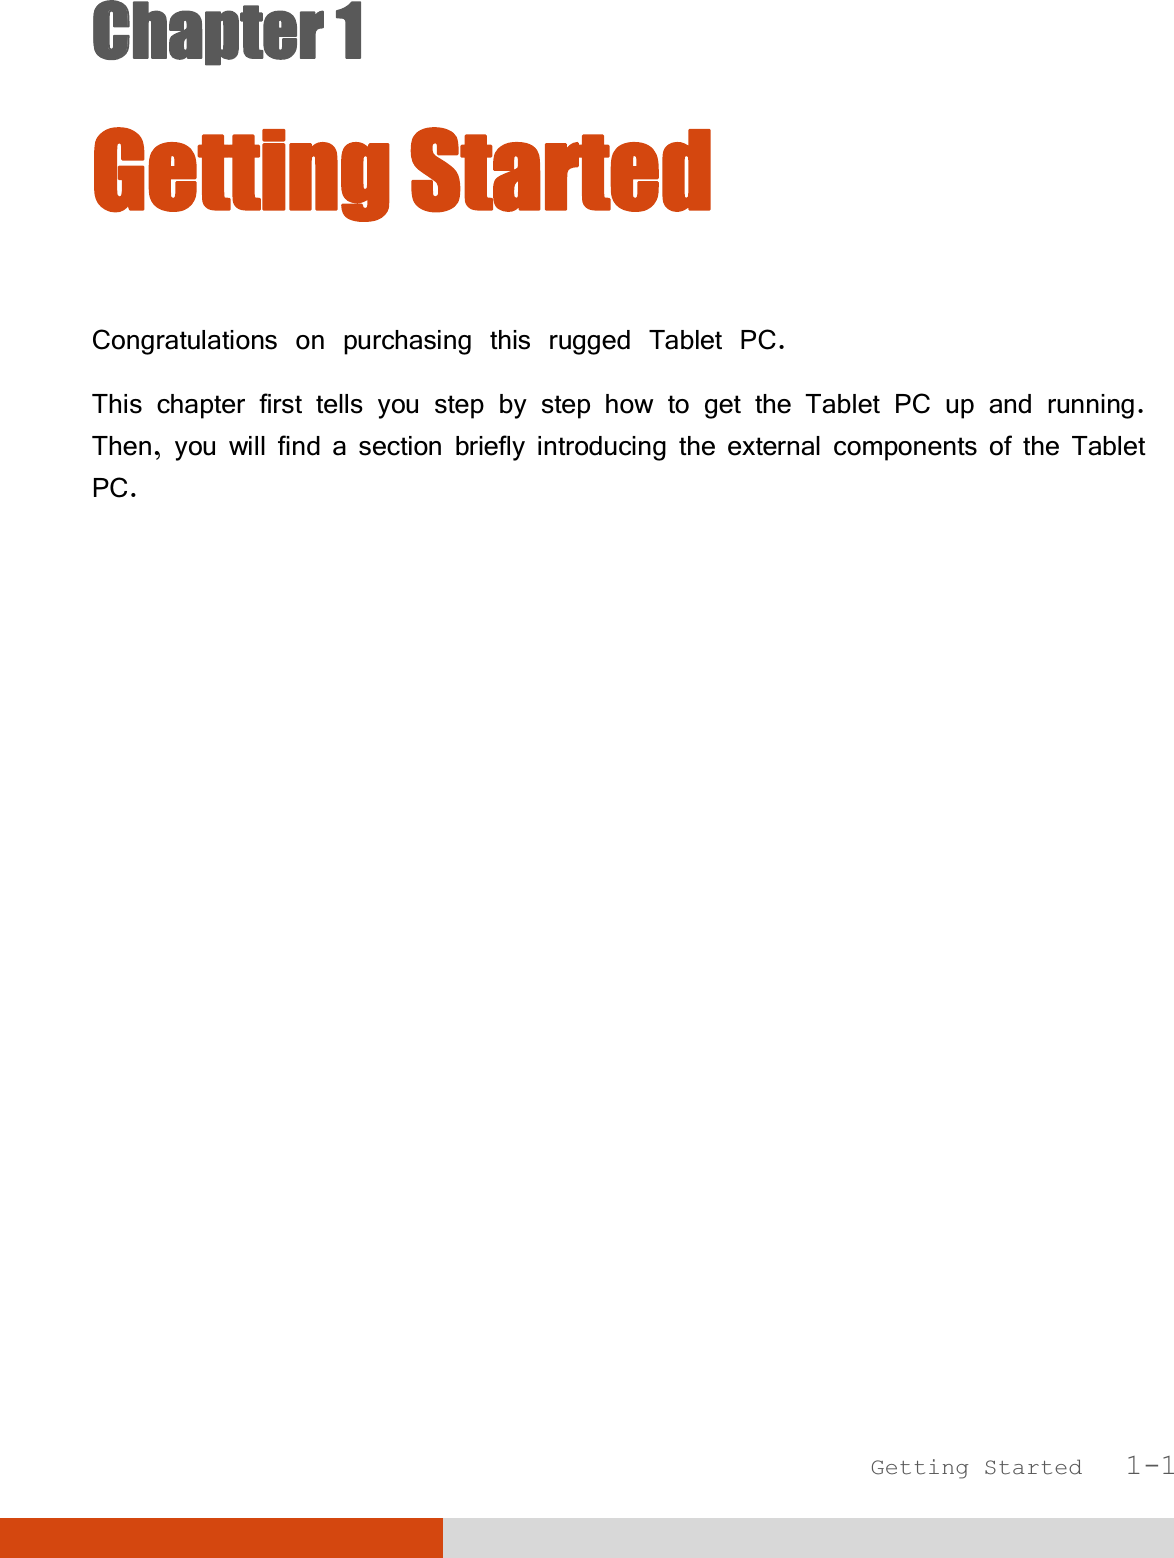  Getting Started   1-1 CChapter 1  Getting Started Congratulations on purchasing this rugged Tablet PC. This chapter first tells you step by step how to get the Tablet PC up and running. Then, you will find a section briefly introducing the external components of the Tablet PC.  